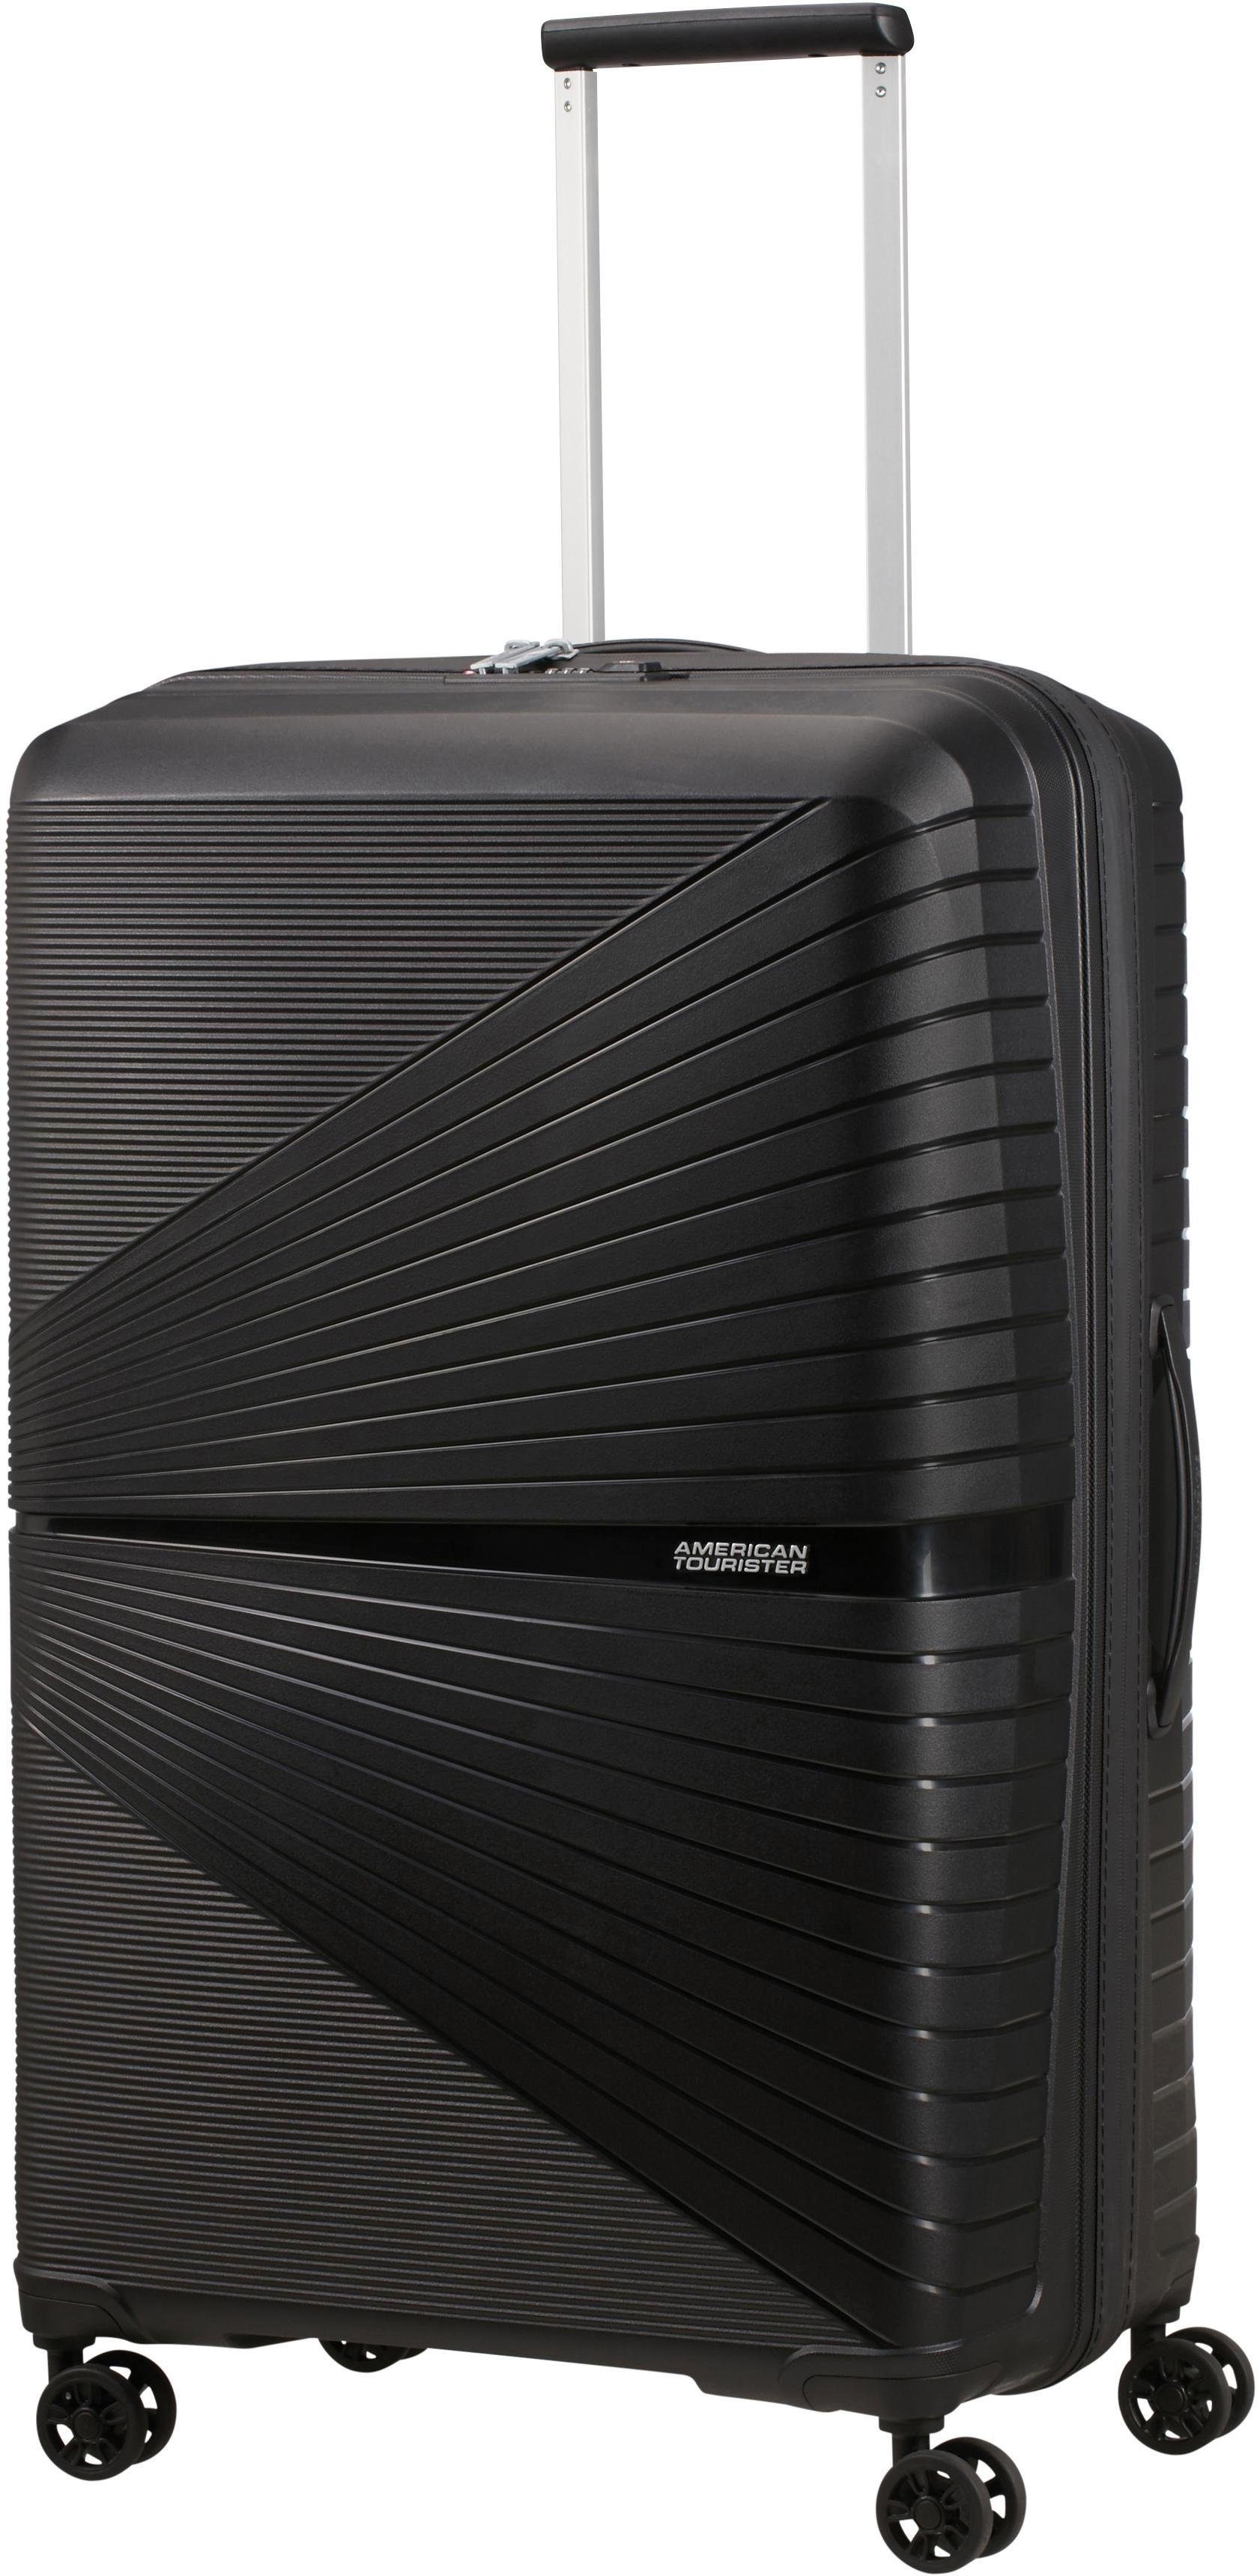 American Tourister® Koffer 77, AIRCONIC Spinner Onyx 4 Rollen Black